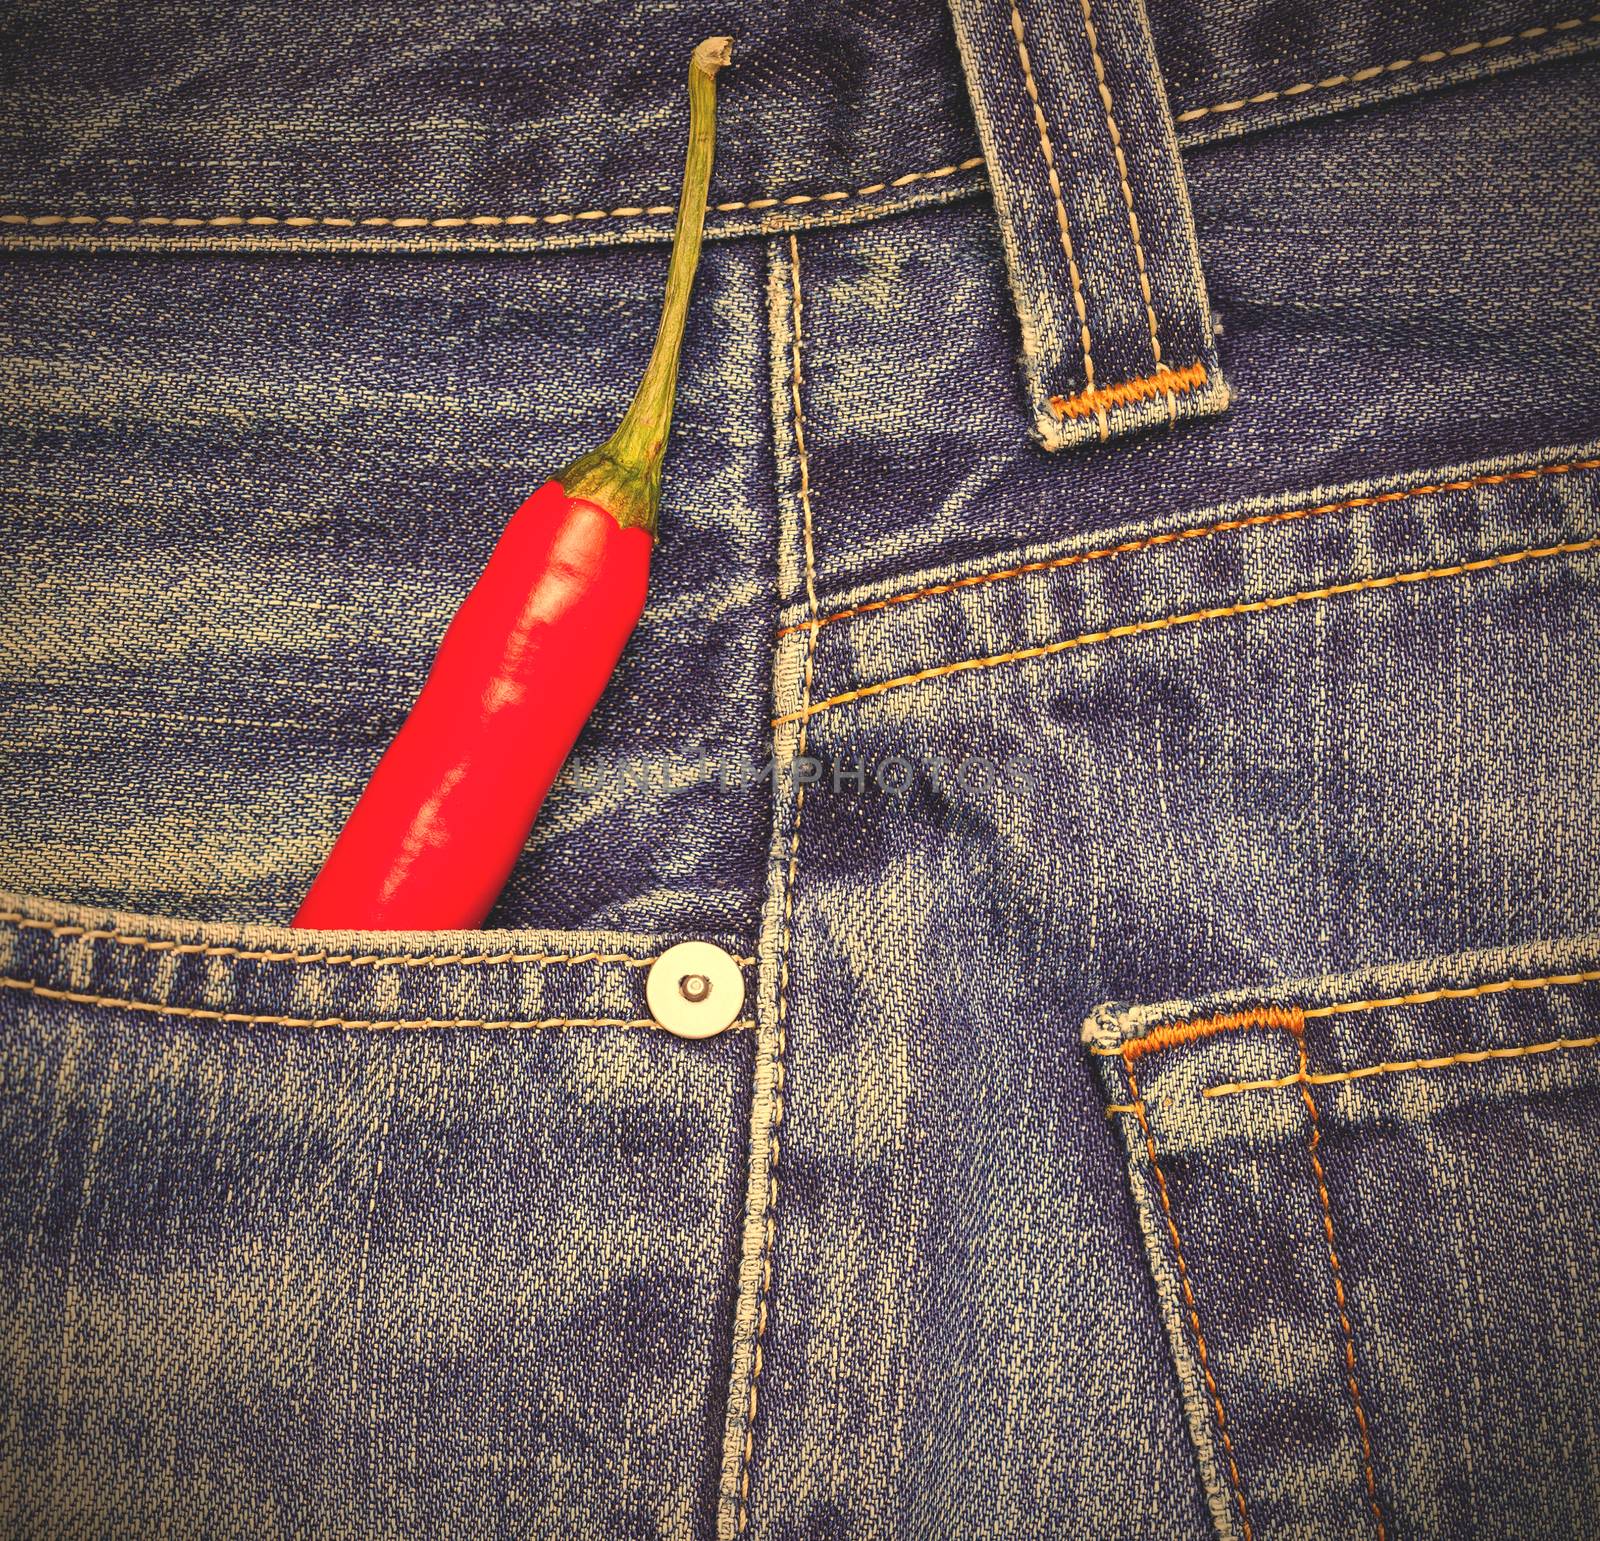 chili peppers in a jeans pocket by Astroid